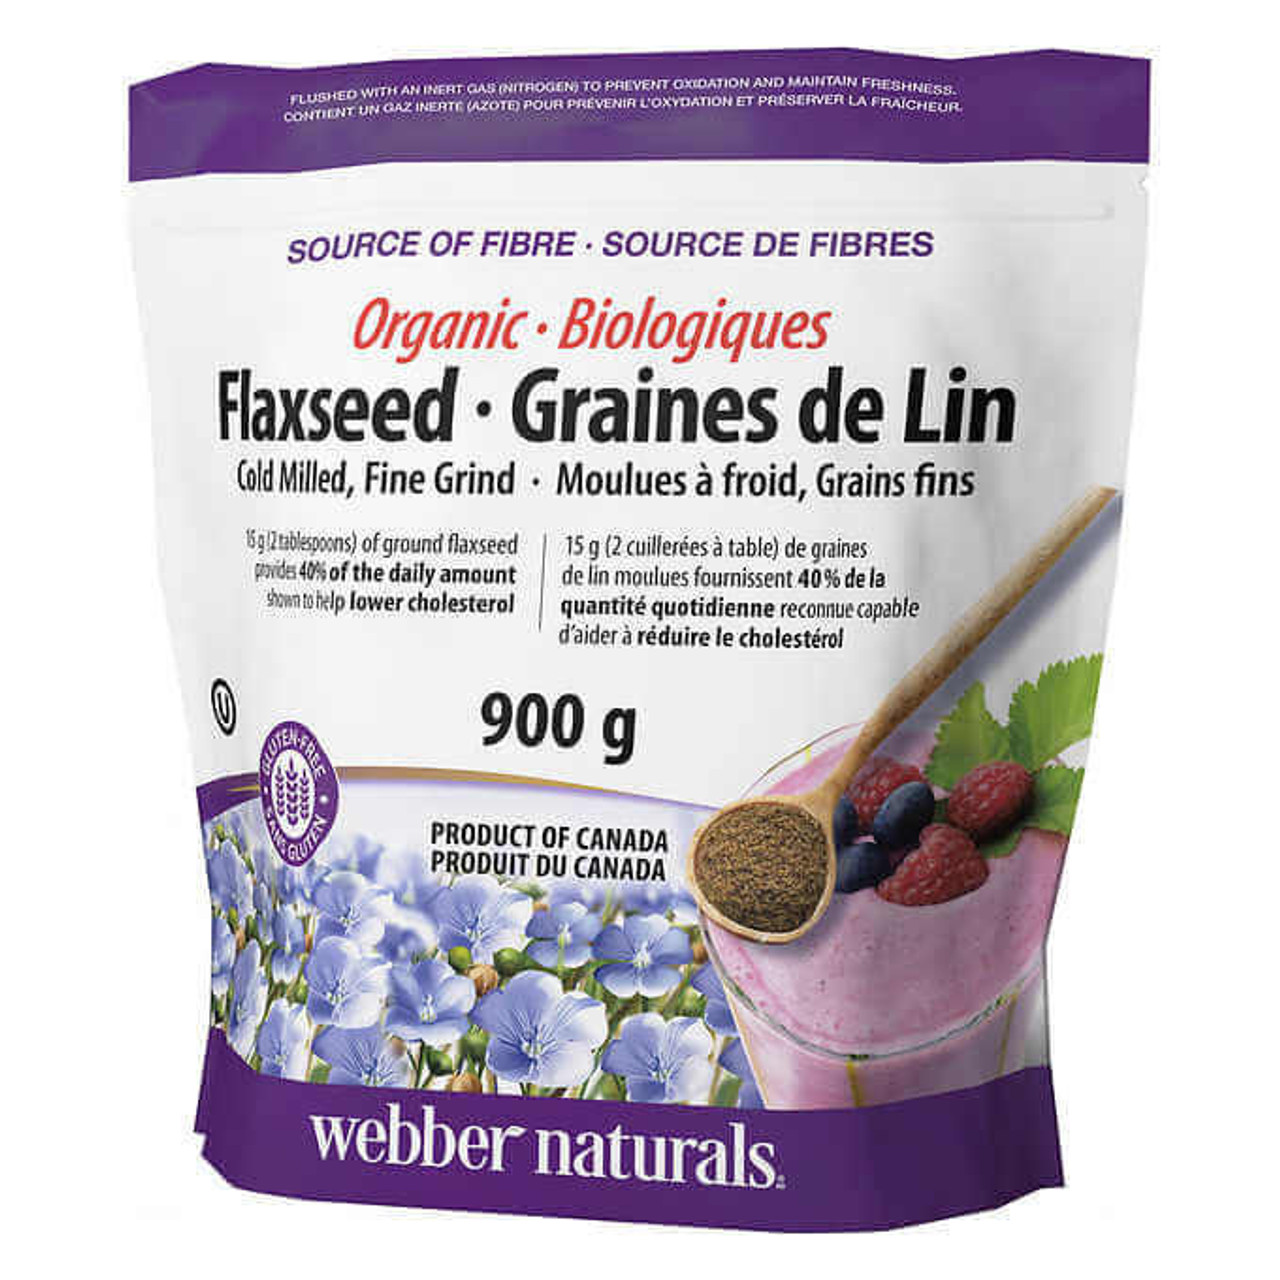 webber naturals Webber Naturals Organic Ground Flaxseed, 900 g, 2-Pack | Nutrient-Rich Flaxseed for a Healthy Diet 